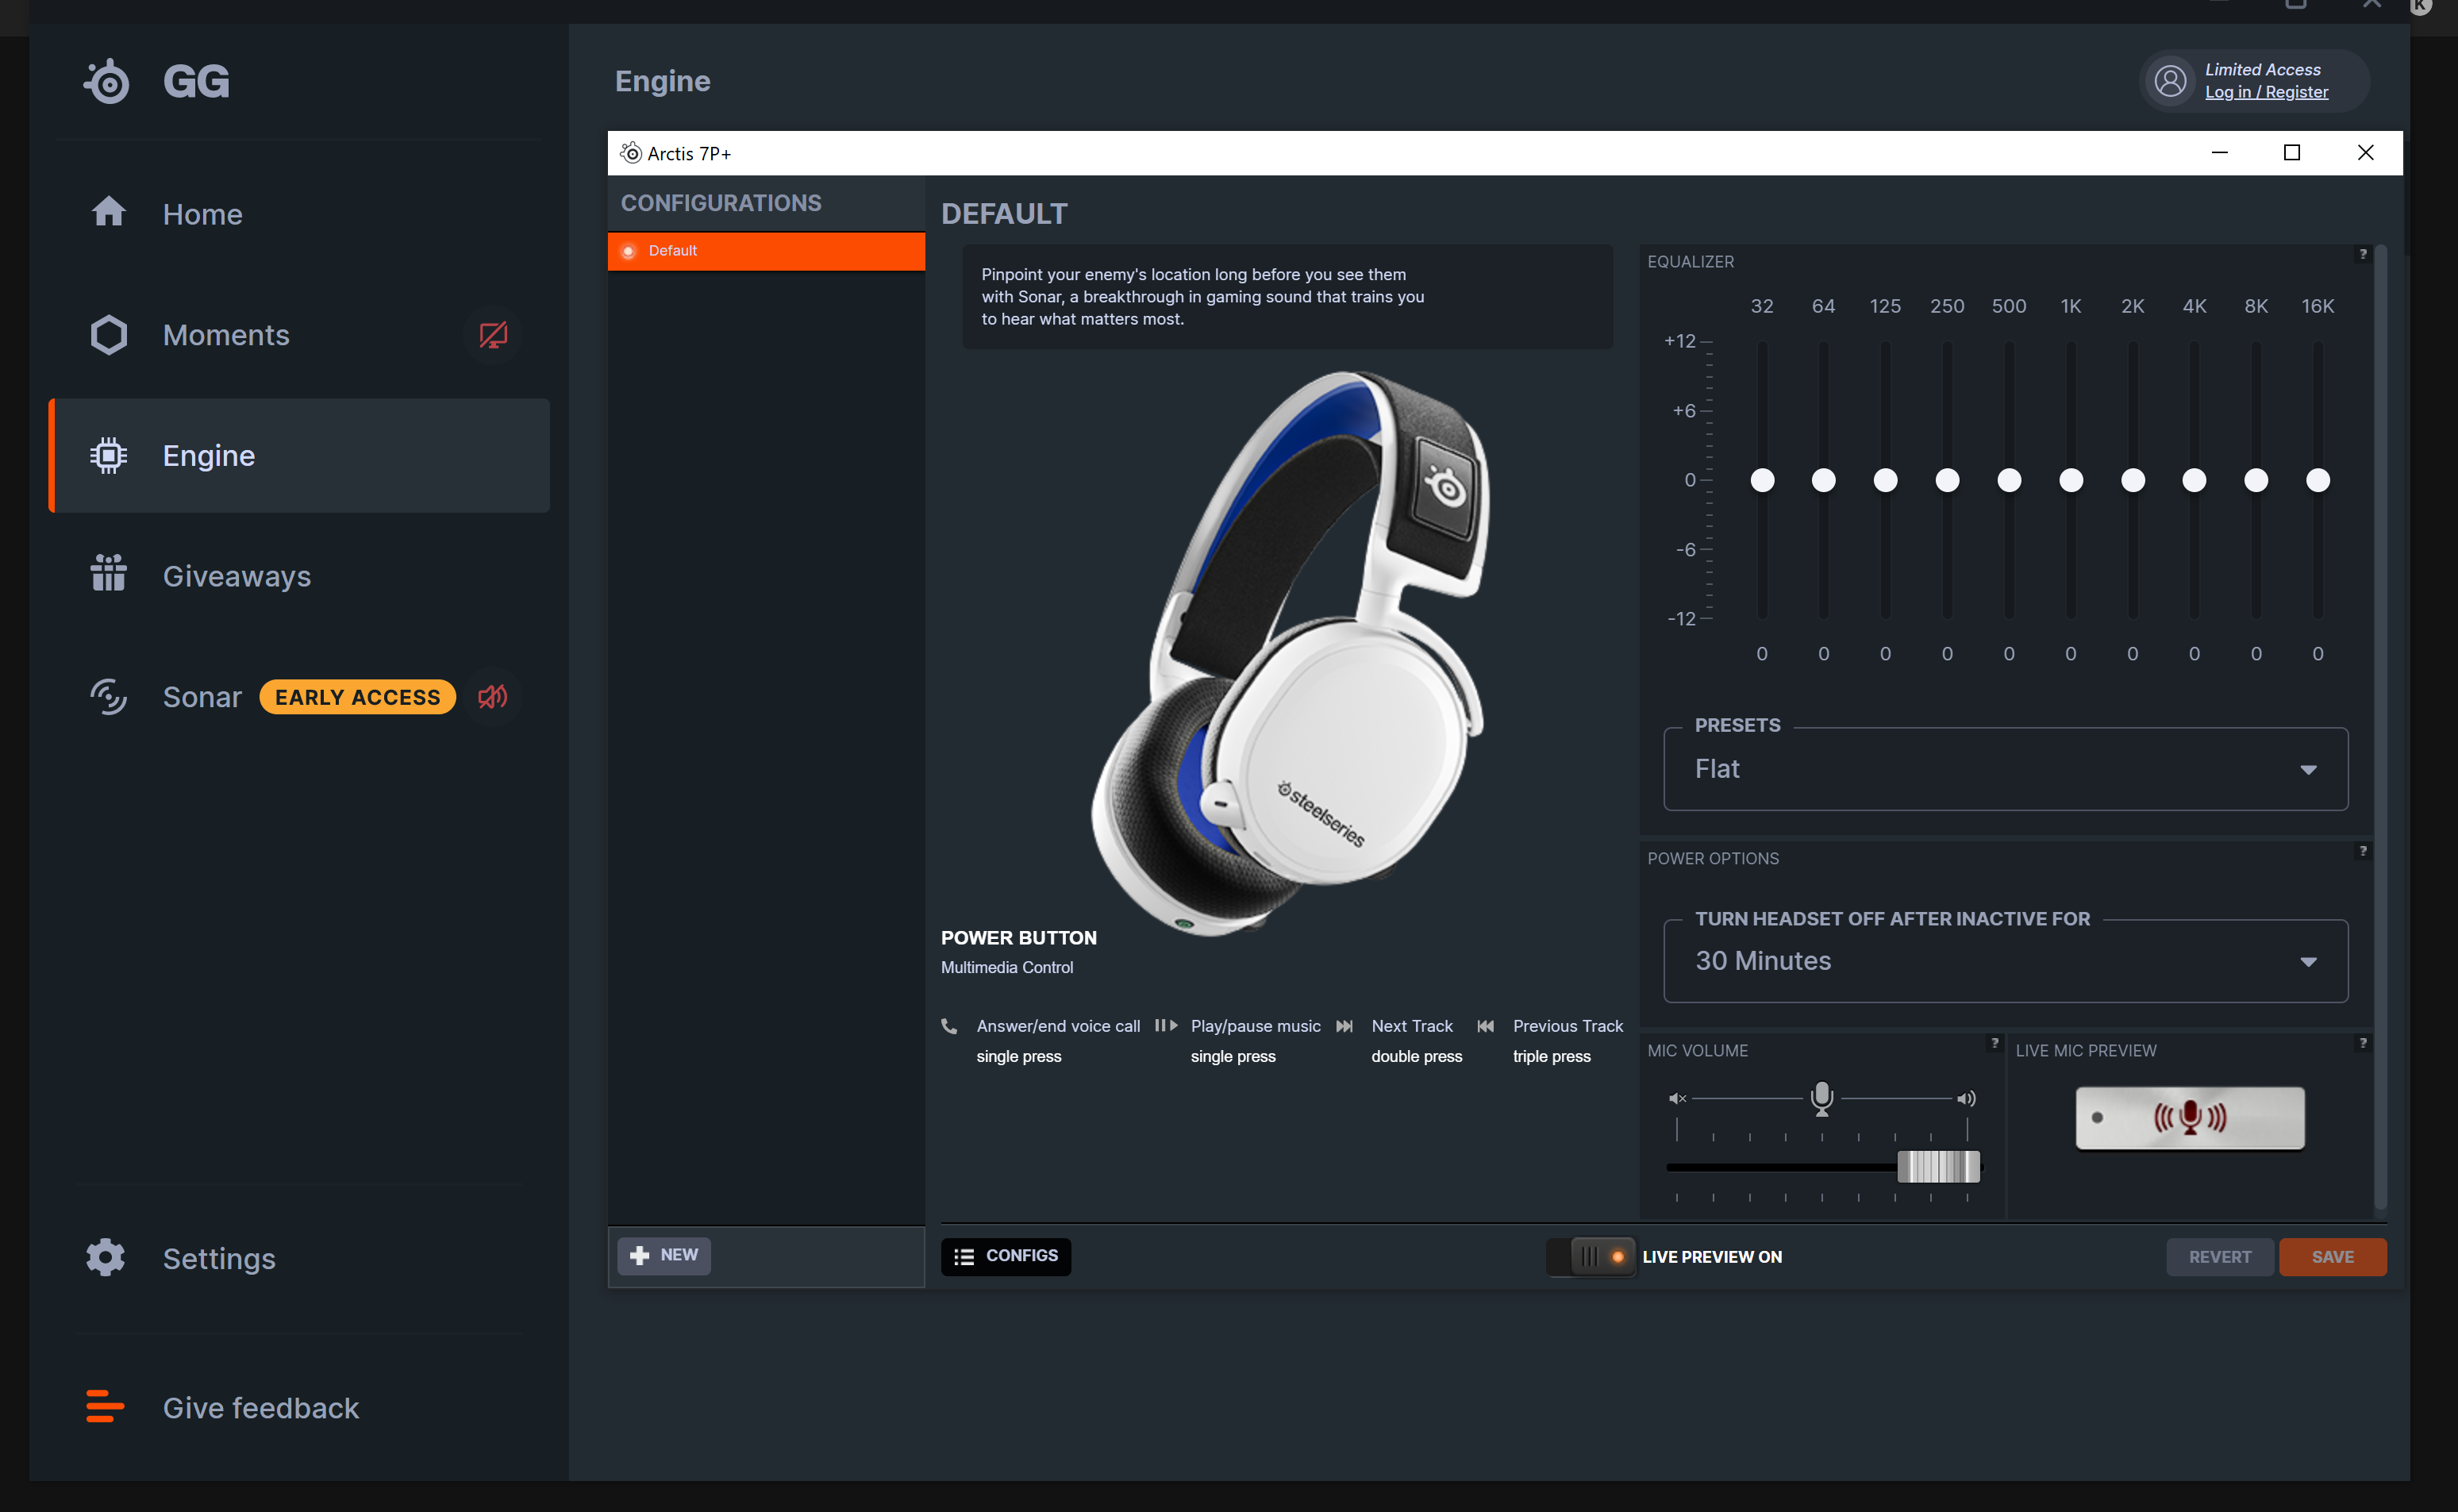 The SteelSeries GG software displaying the 7P+ Wireless Headset.